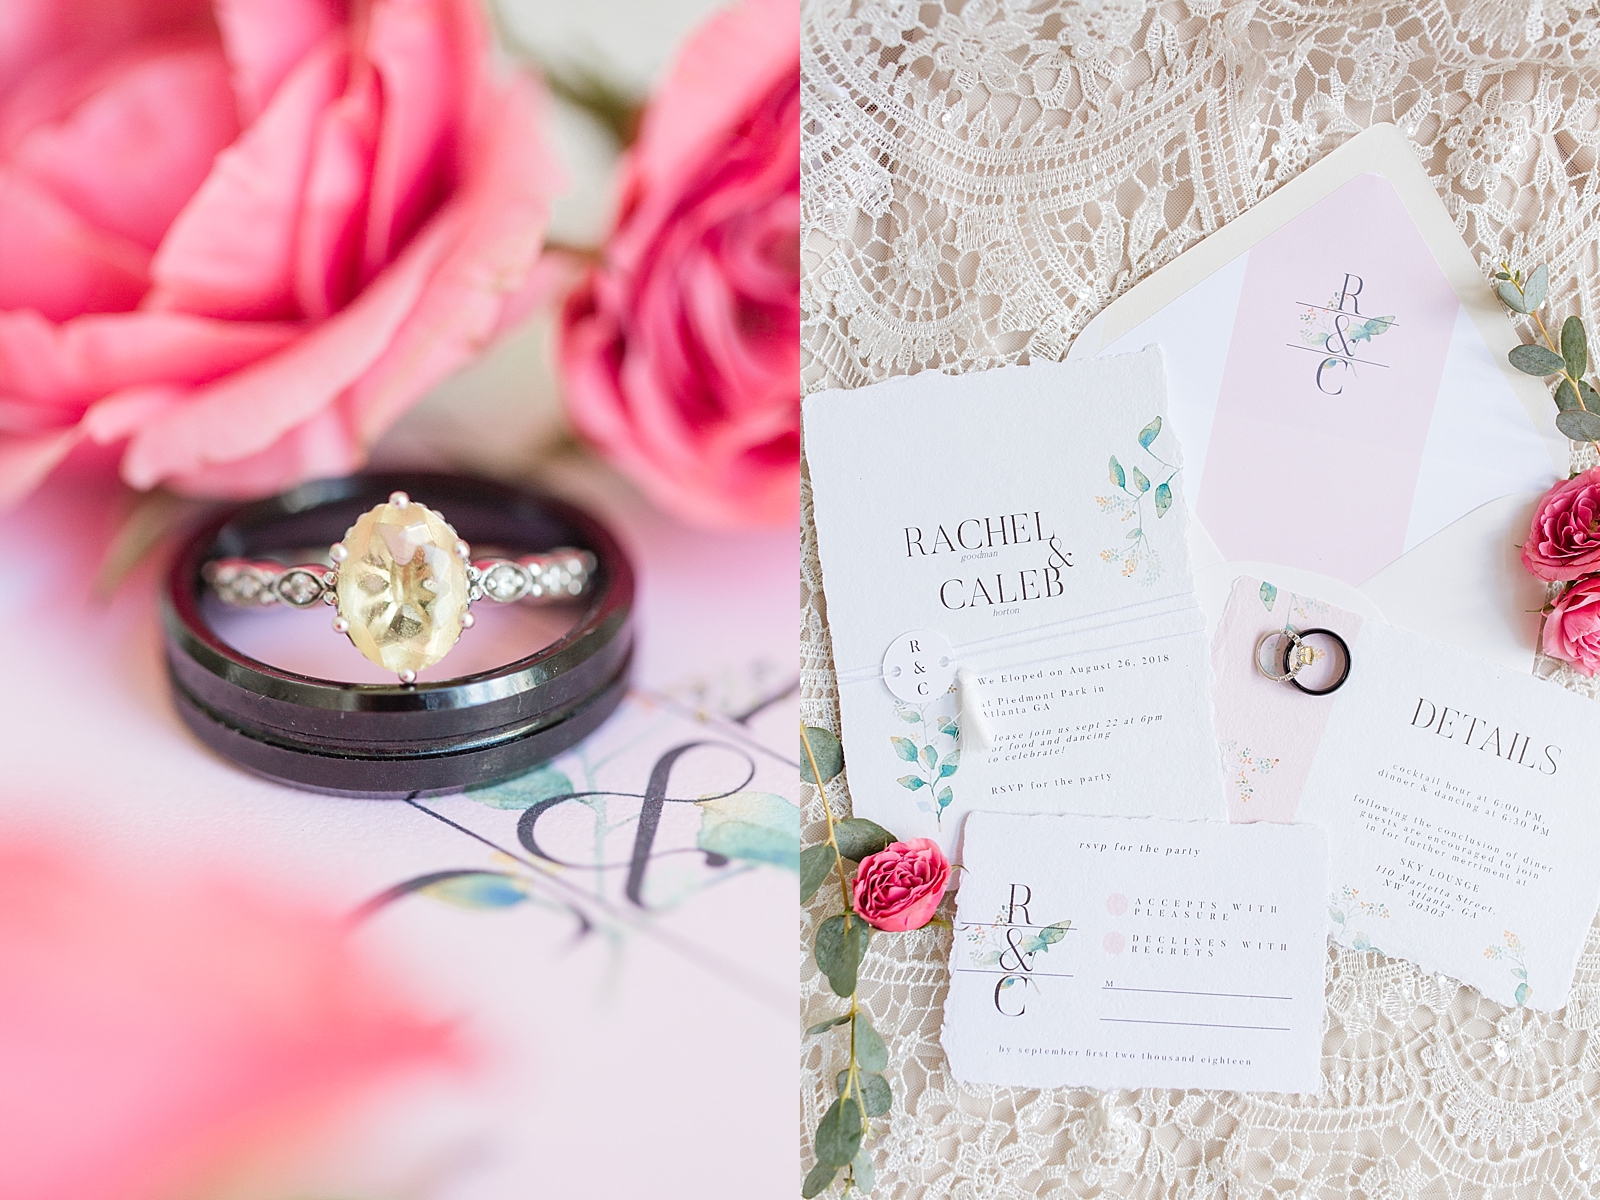 Atlanta Georgia Elopement wedding rings on invitation suite with pink roses and invitation suite Photos